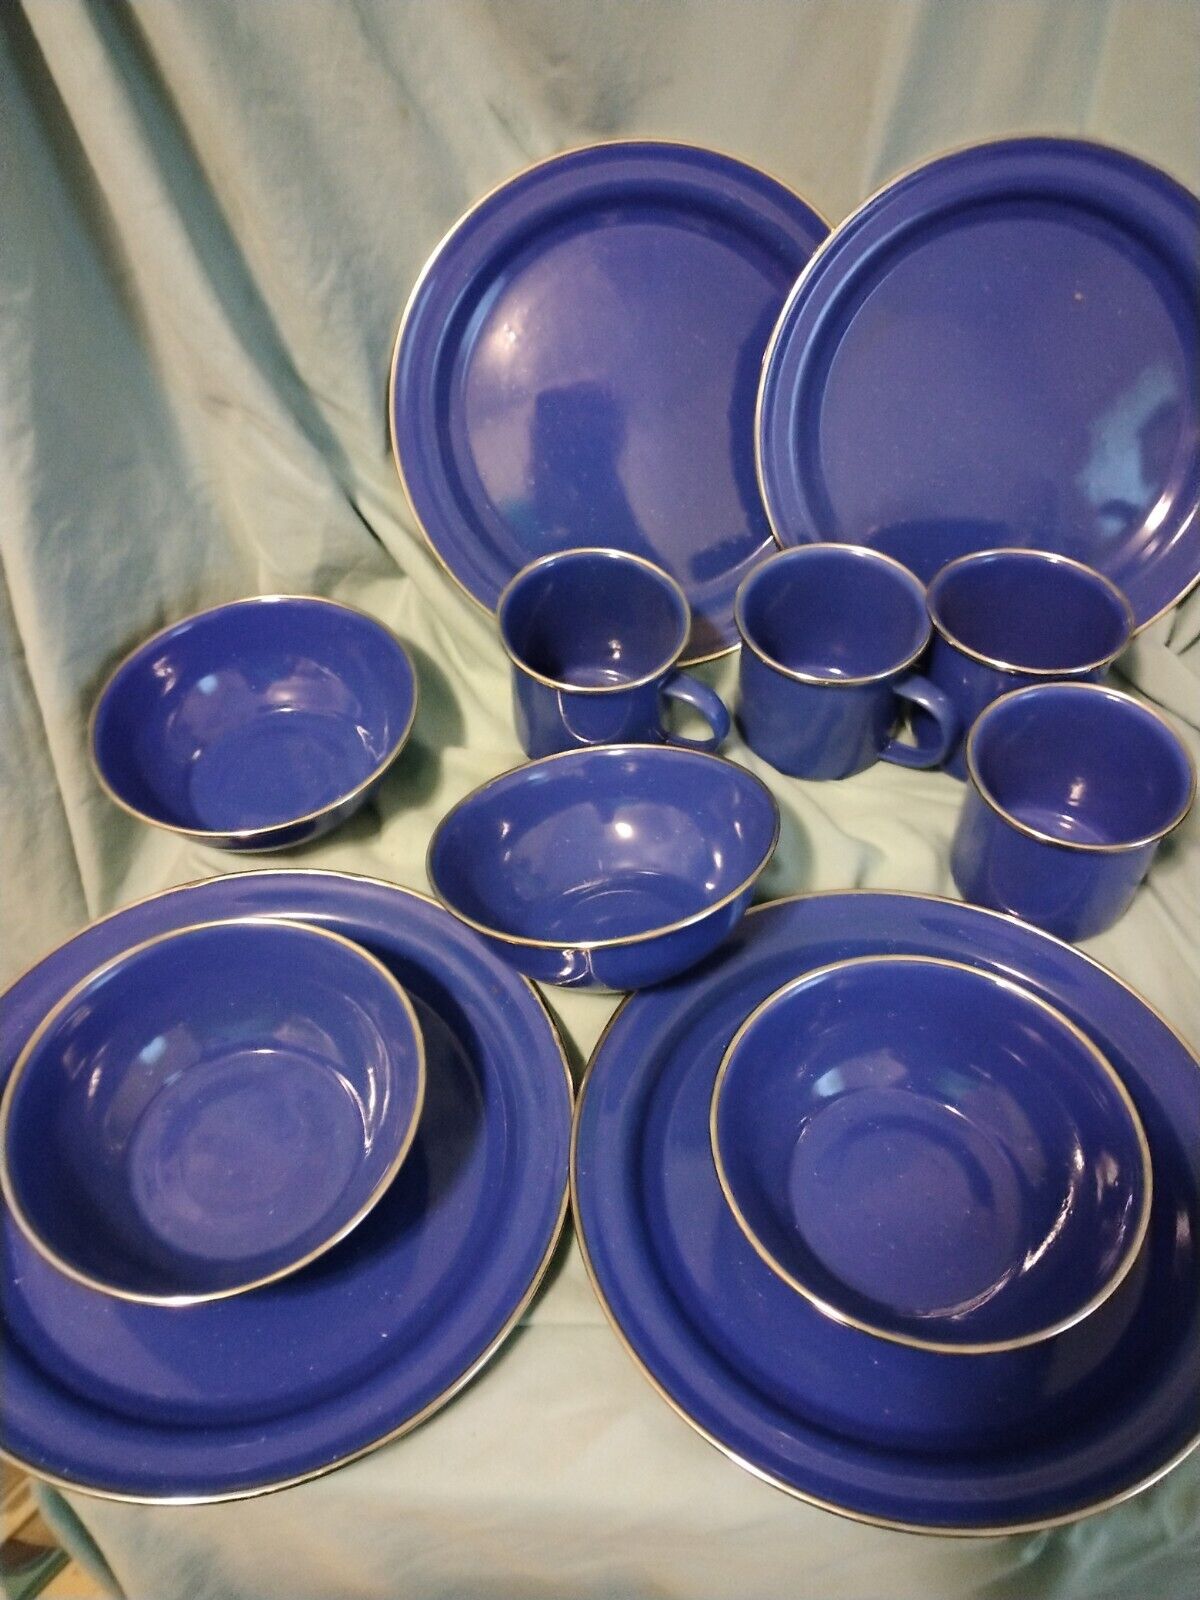 New ENAMELWARE BLUE WHITE SPECKLED METAL CAMPING DISHES-Plates Bowls Cups